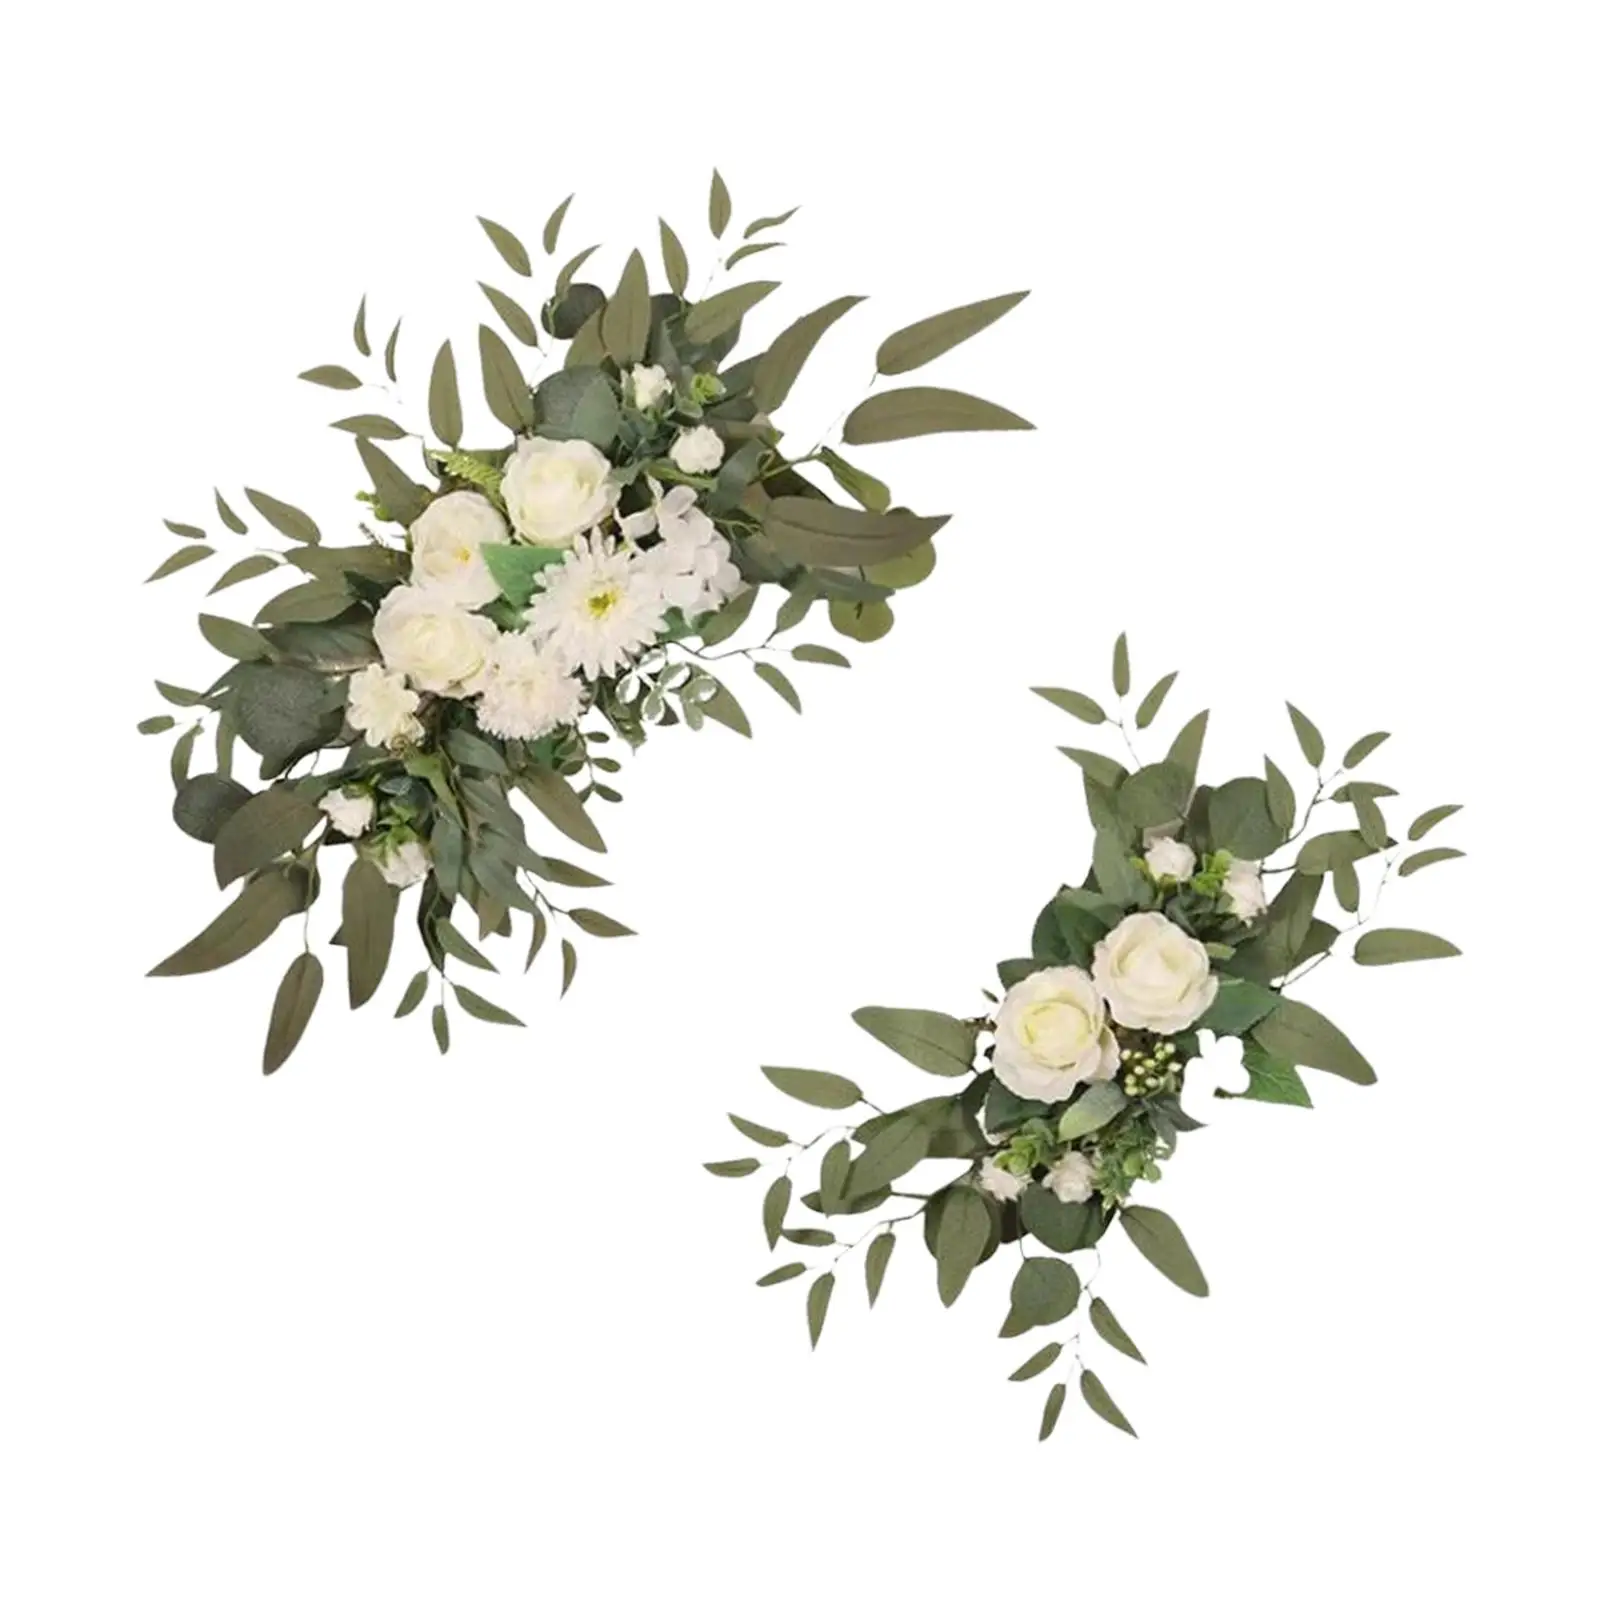 2 Pieces Wedding Arch Flowers Green Leaves Handmade Decorative Floral Swag Floral Wreath for Wall Party Welcome Sign Table Decor